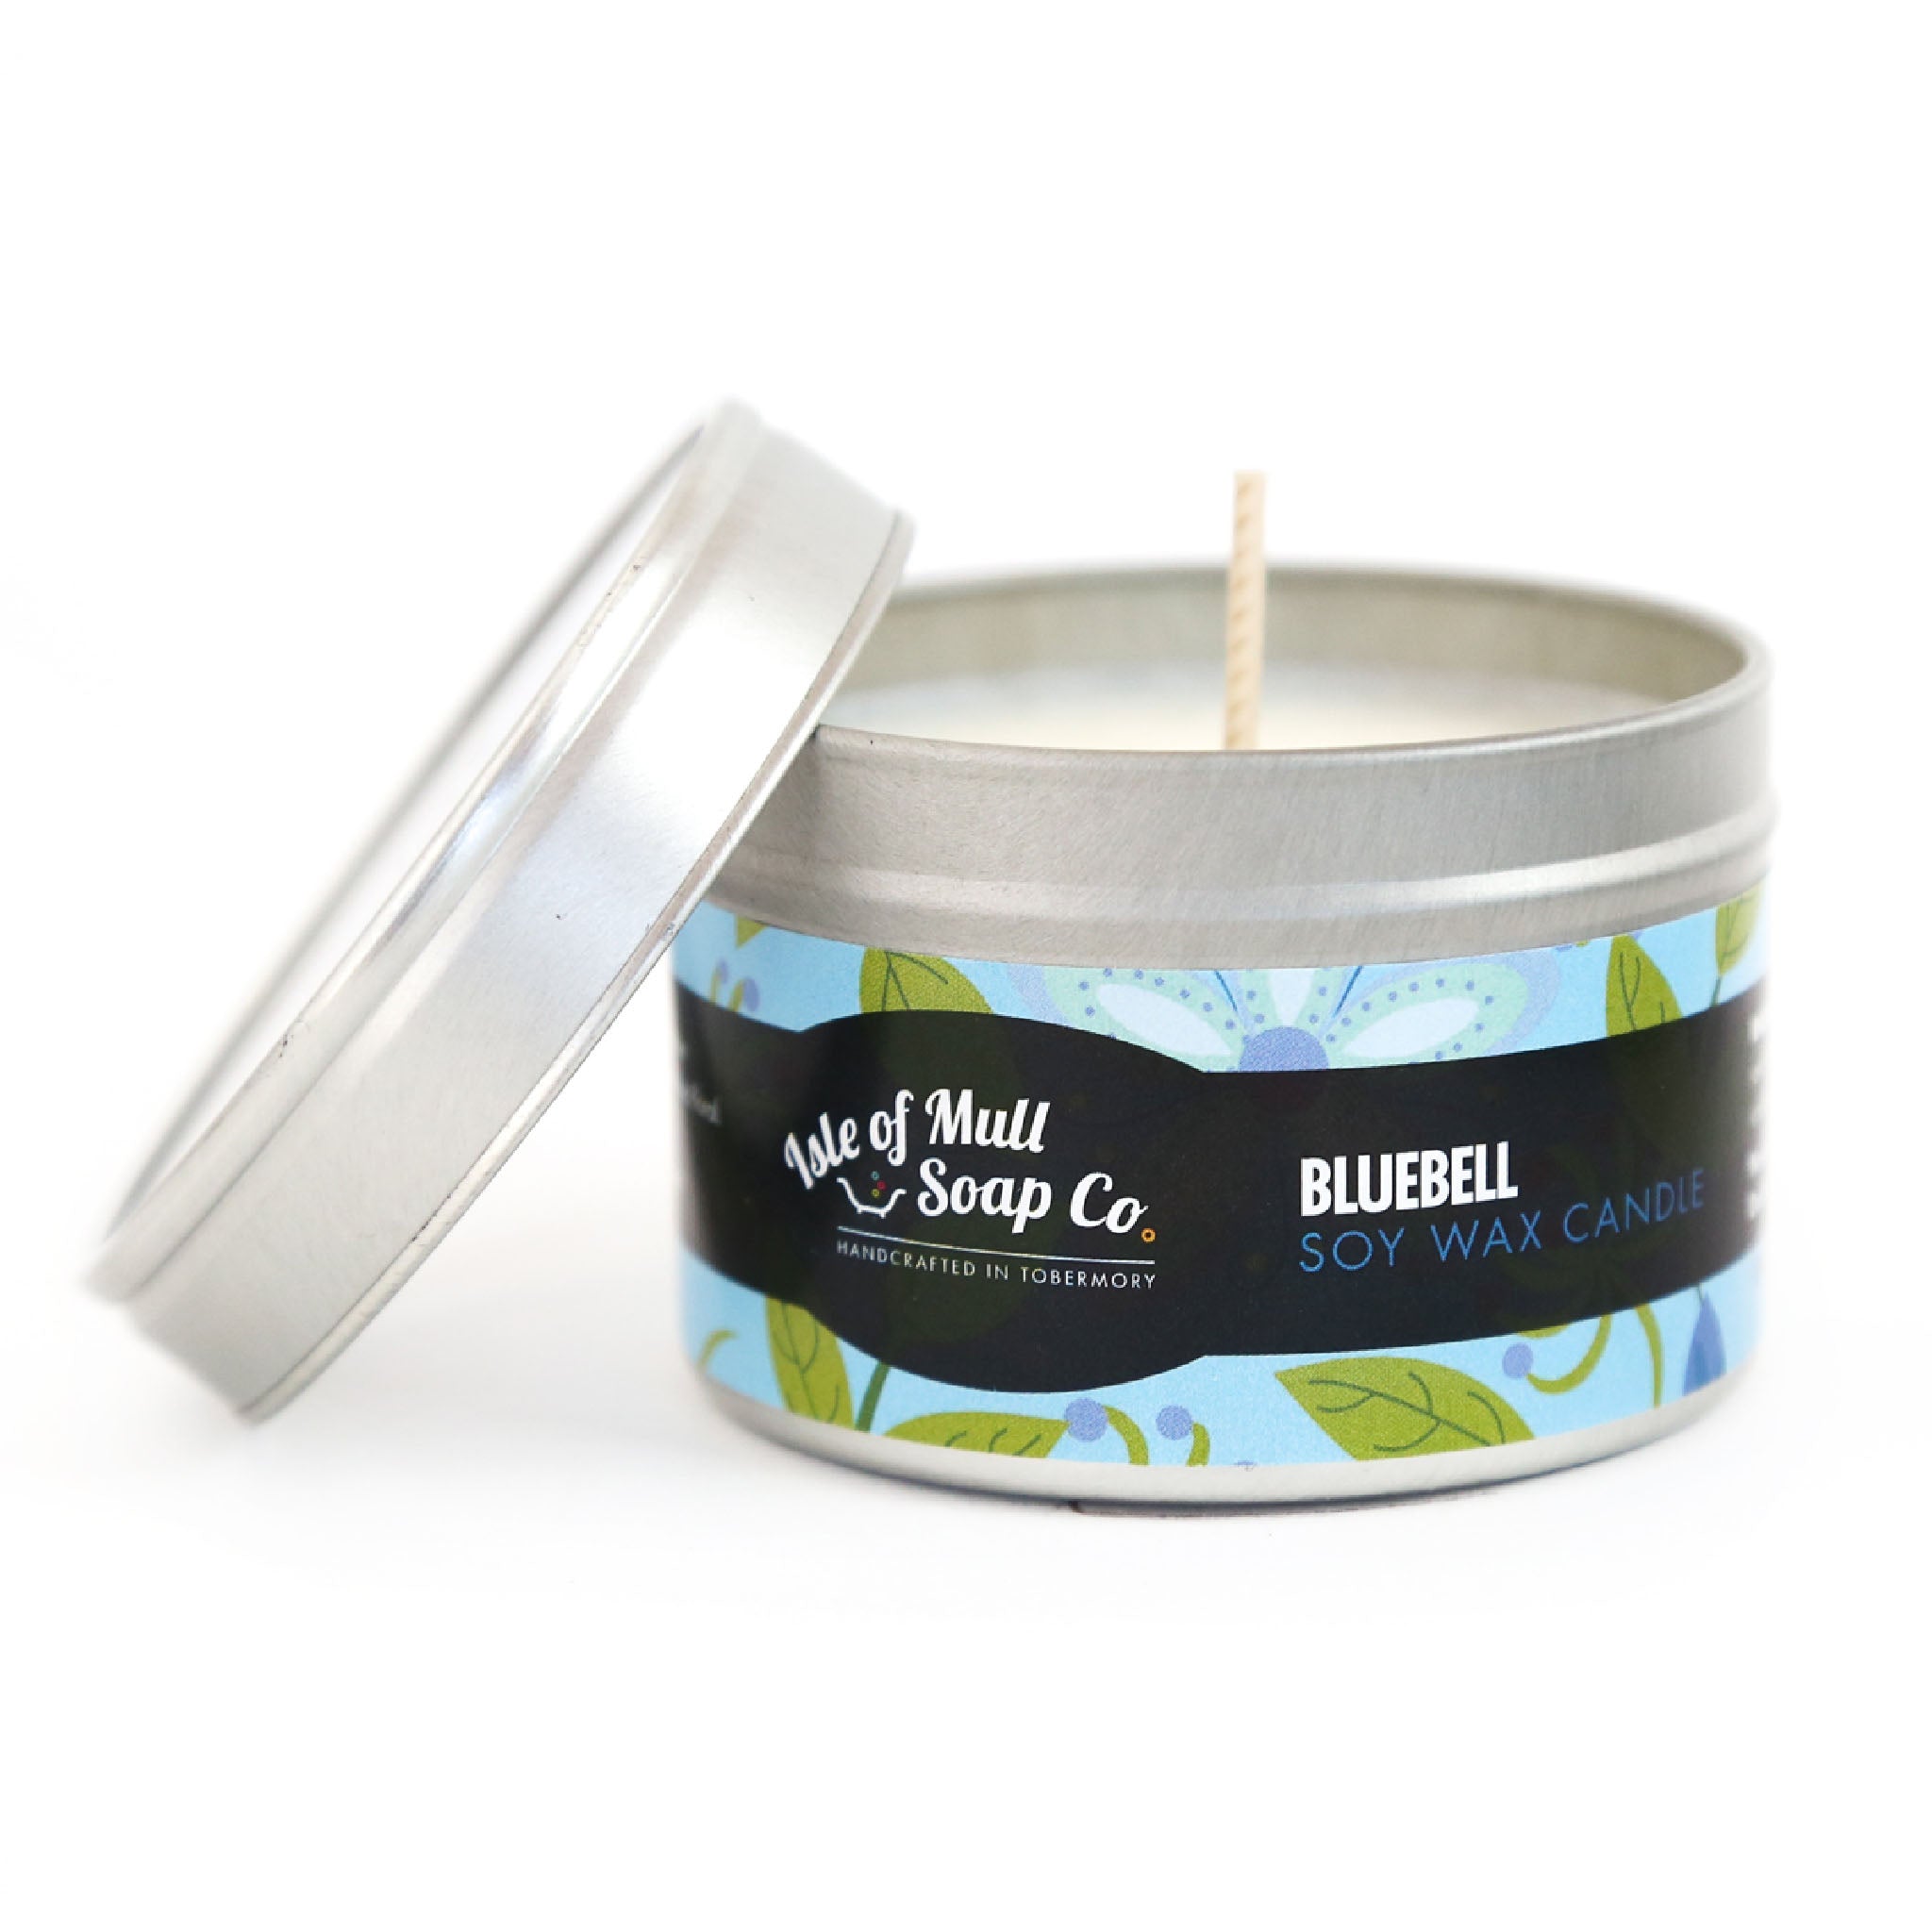 Bluebell Isle of Mull Candle